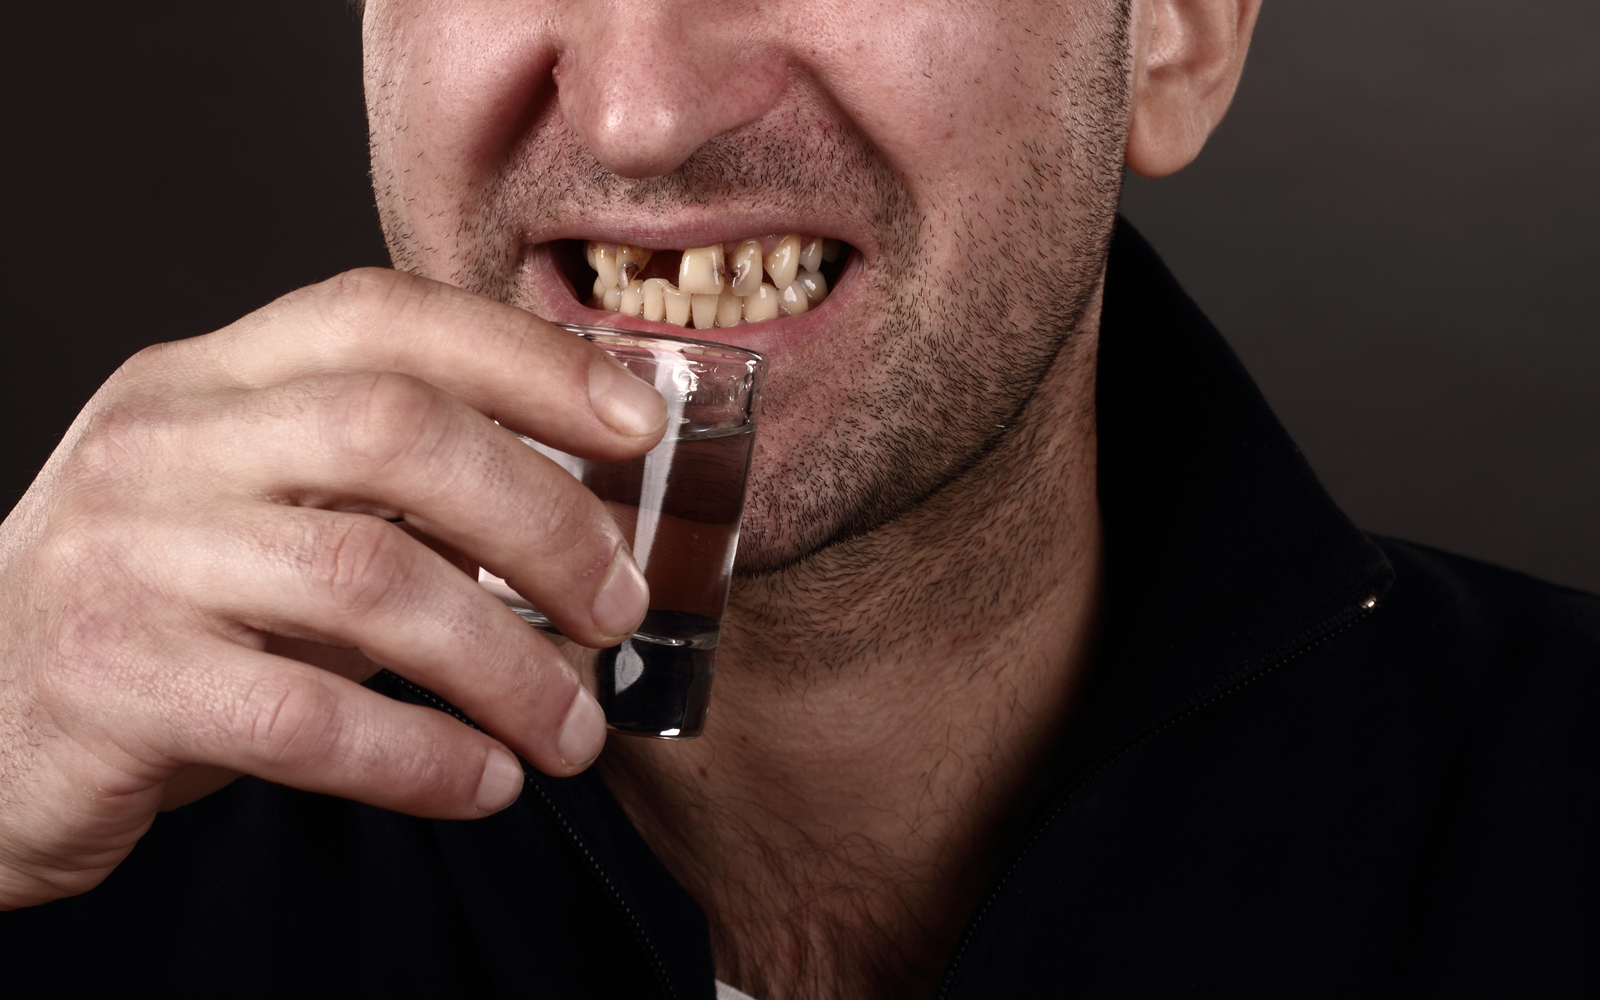 Man with Damaged teeth drinking alcohol